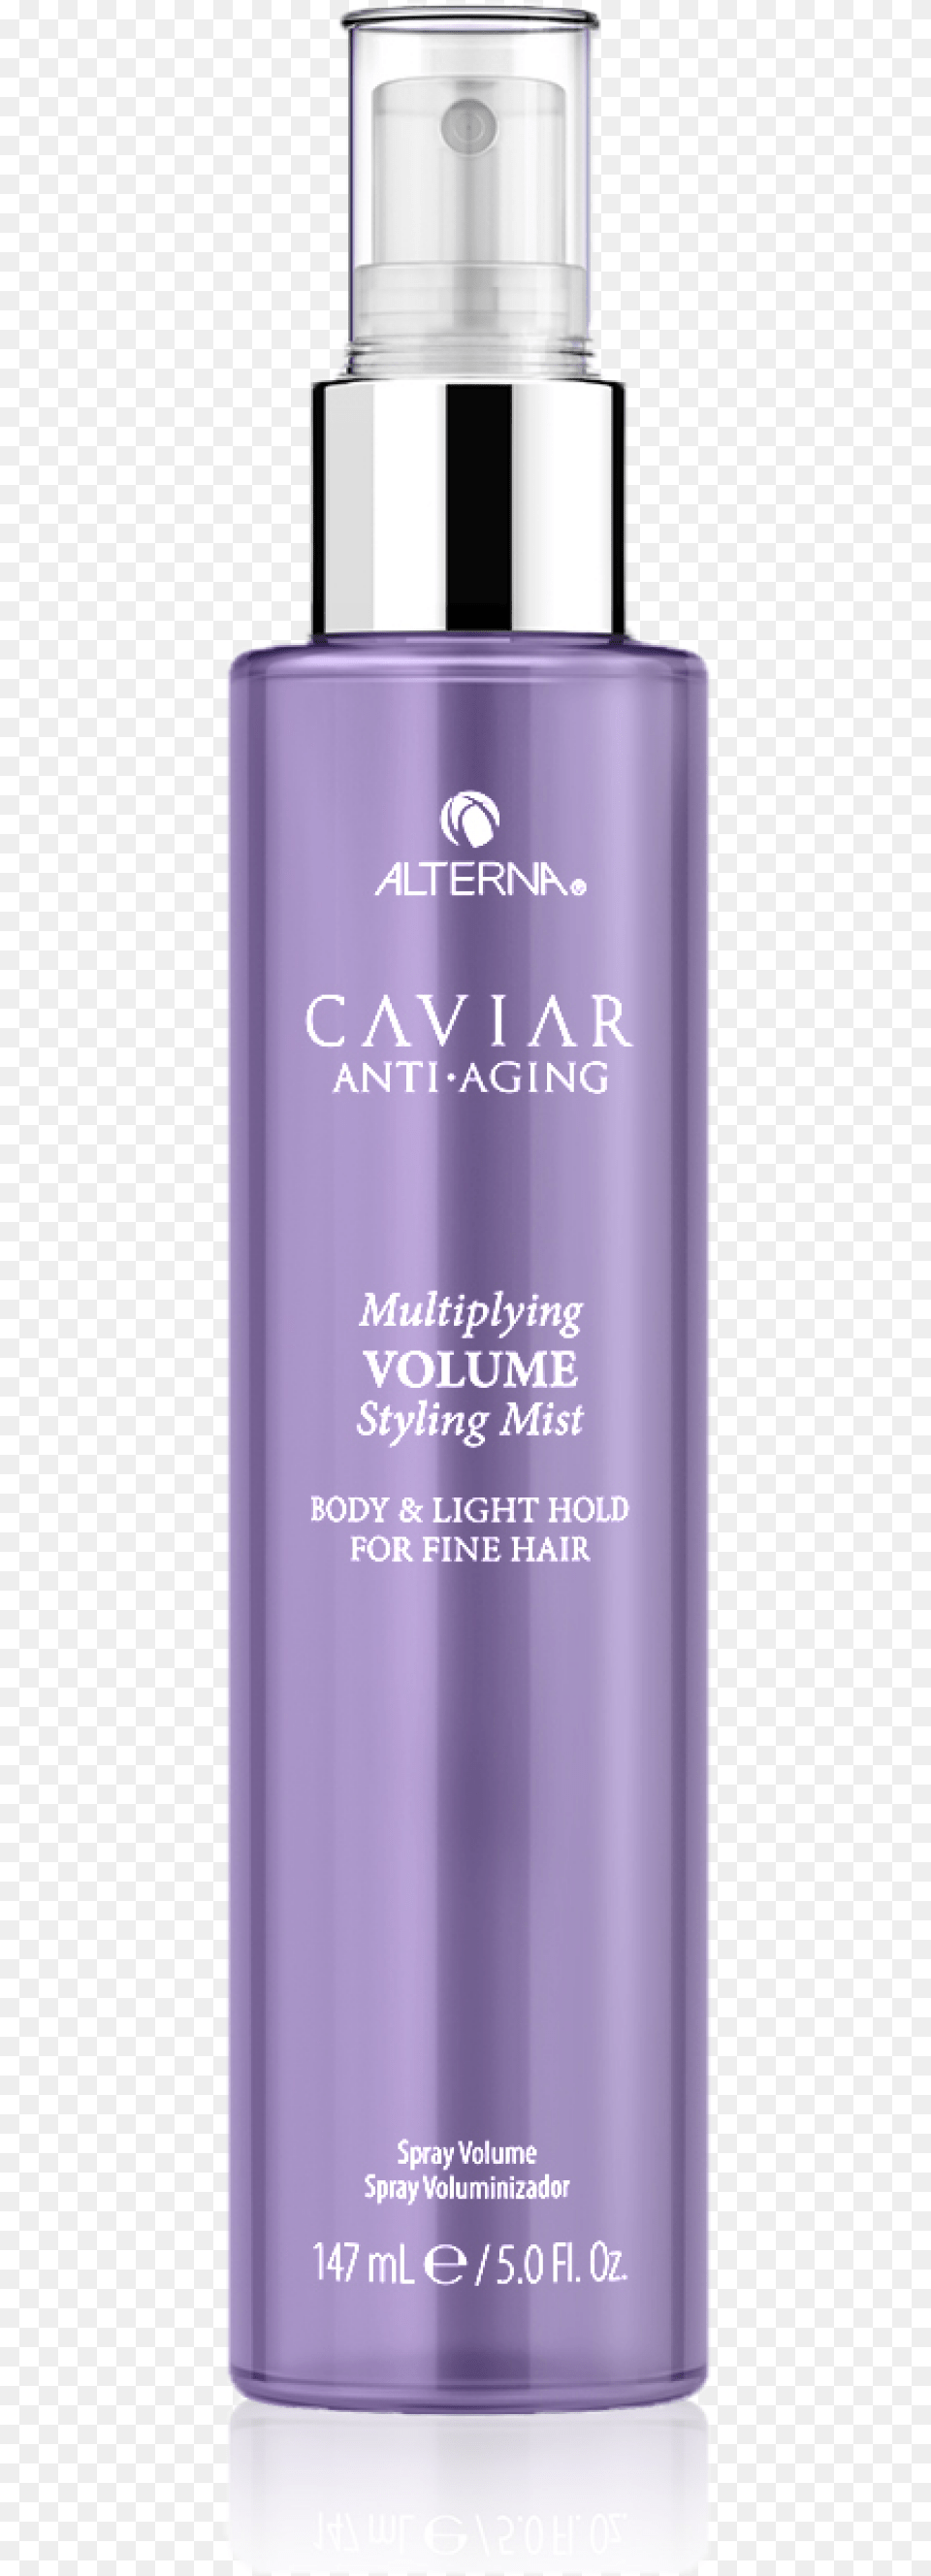 Multiplying Volume Styling Mist 2 Caviar Smoothing Anti Frizz Dry Oil Mist, Bottle, Cosmetics, Perfume Free Png Download